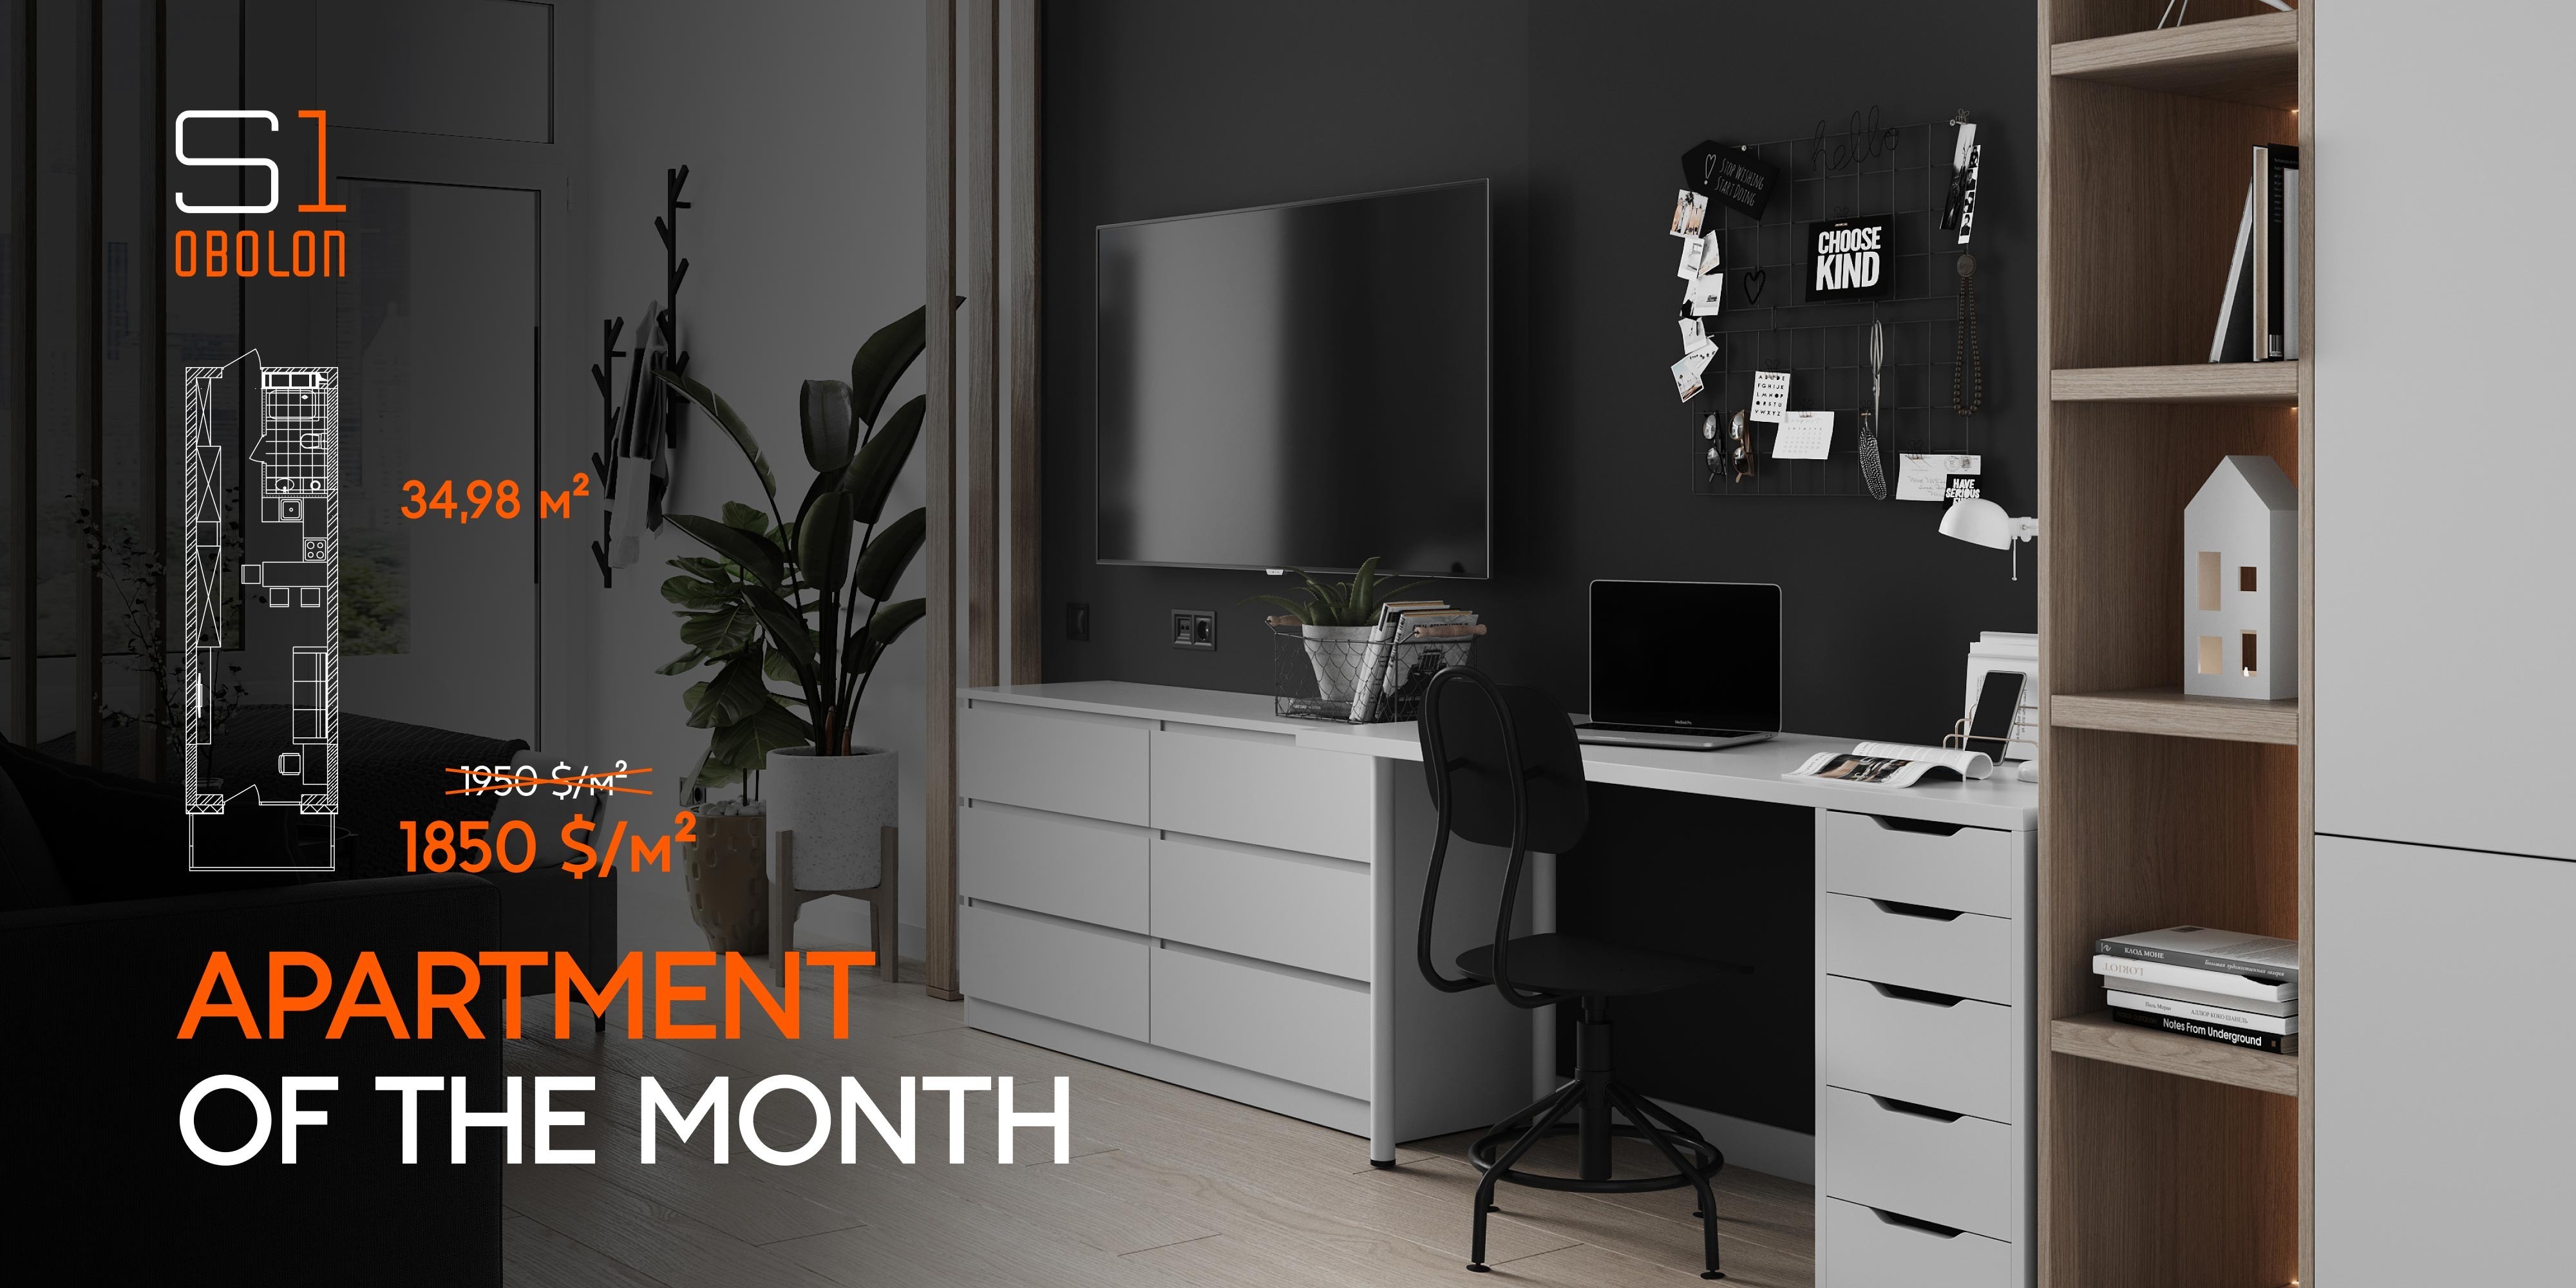 Apartments of the month from S1 Obolon